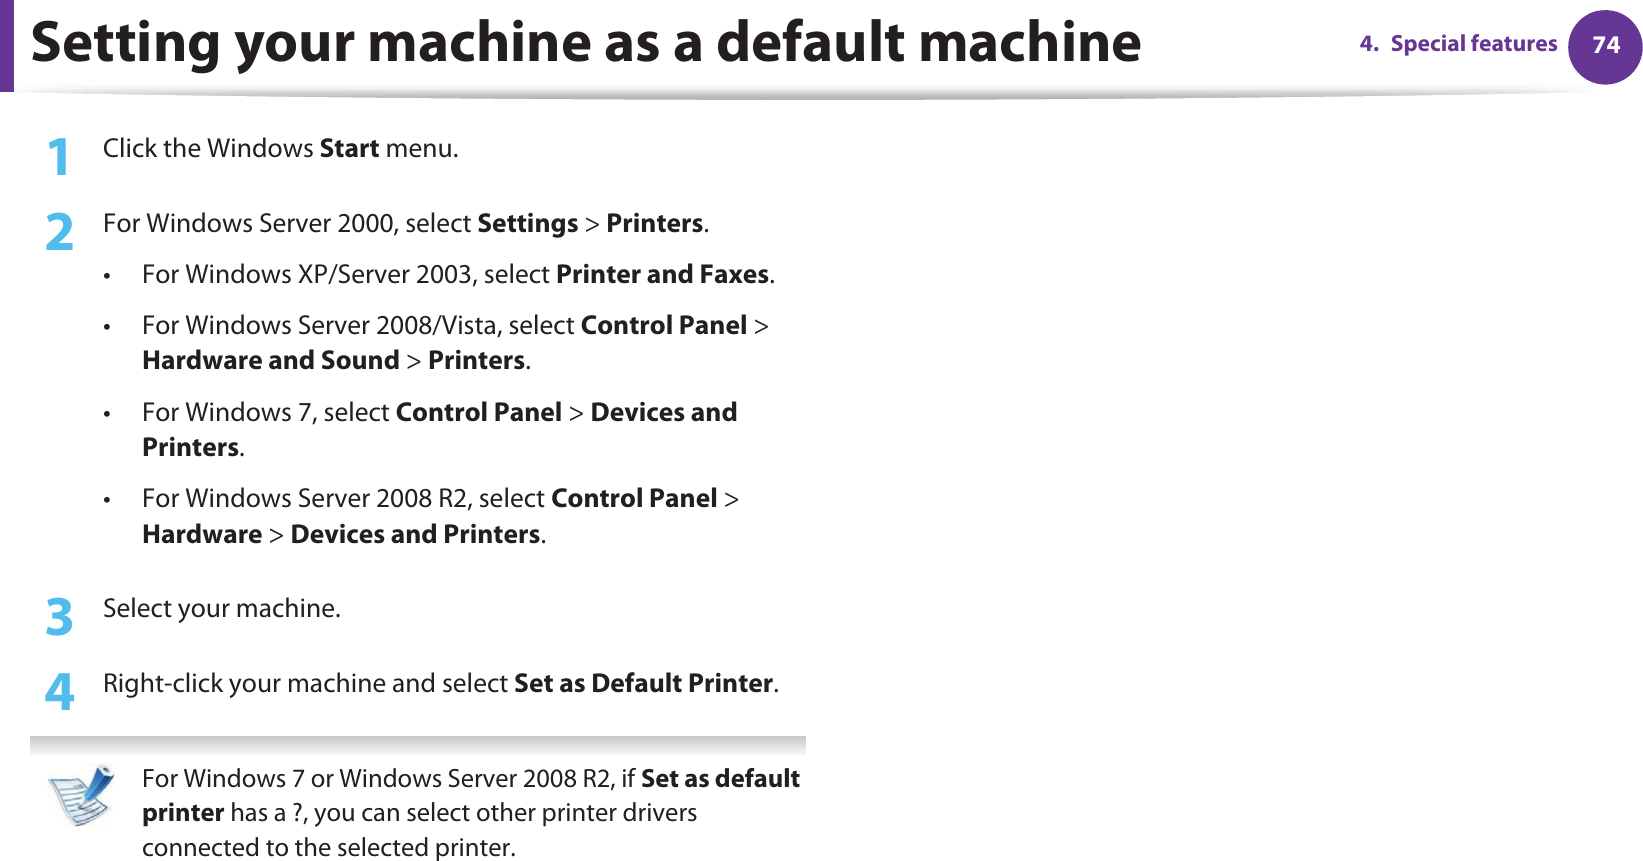 744. Special featuresSetting your machine as a default machine1Click the Windows Start menu.2  For Windows Server 2000, select Settings &gt; Printers.• For Windows XP/Server 2003, select Printer and Faxes. • For Windows Server 2008/Vista, select Control Panel &gt; Hardware and Sound &gt; Printers. • For Windows 7, select Control Panel &gt; Devices and Printers. • For Windows Server 2008 R2, select Control Panel &gt; Hardware &gt; Devices and Printers. 3  Select your machine.4  Right-click your machine and select Set as Default Printer. For Windows 7 or Windows Server 2008 R2, if Set as default printer has a ?, you can select other printer drivers connected to the selected printer. 